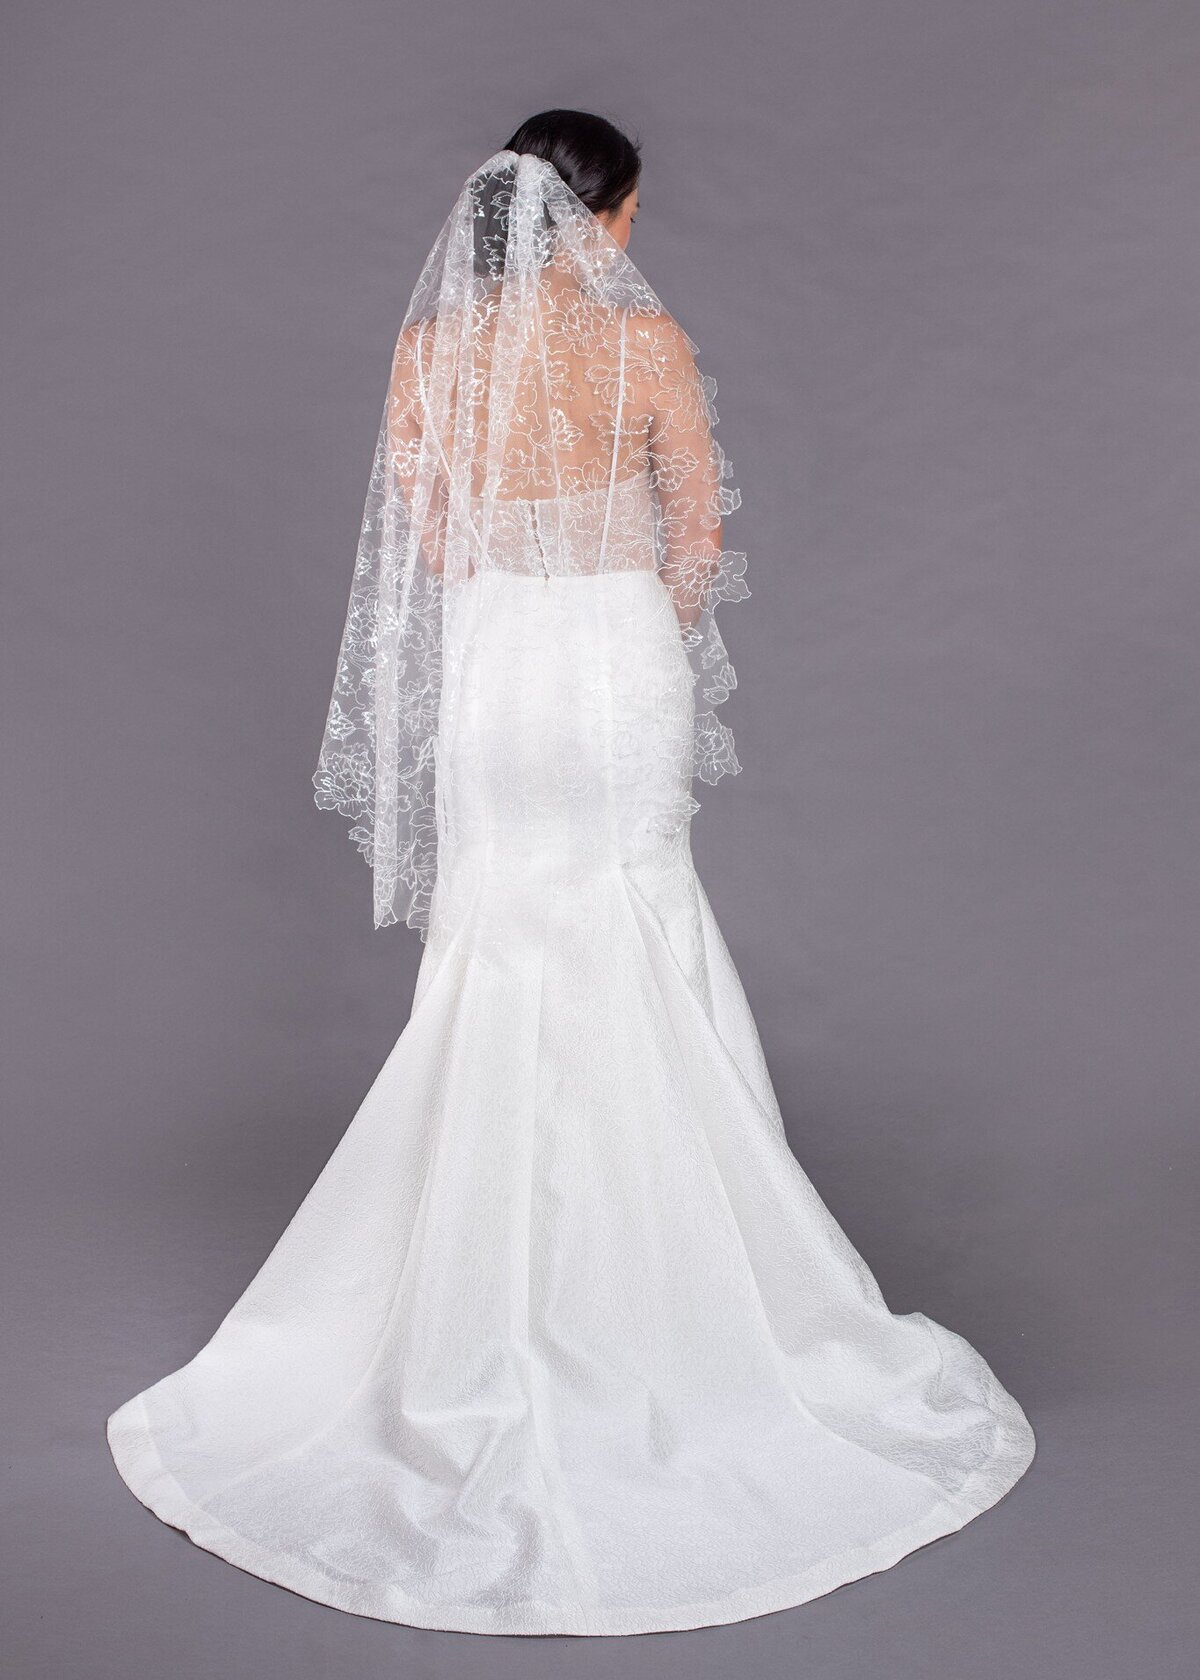 The Lilies Veil is a fingertip-length bridal veil in a sequin and flower embroidered tulle.